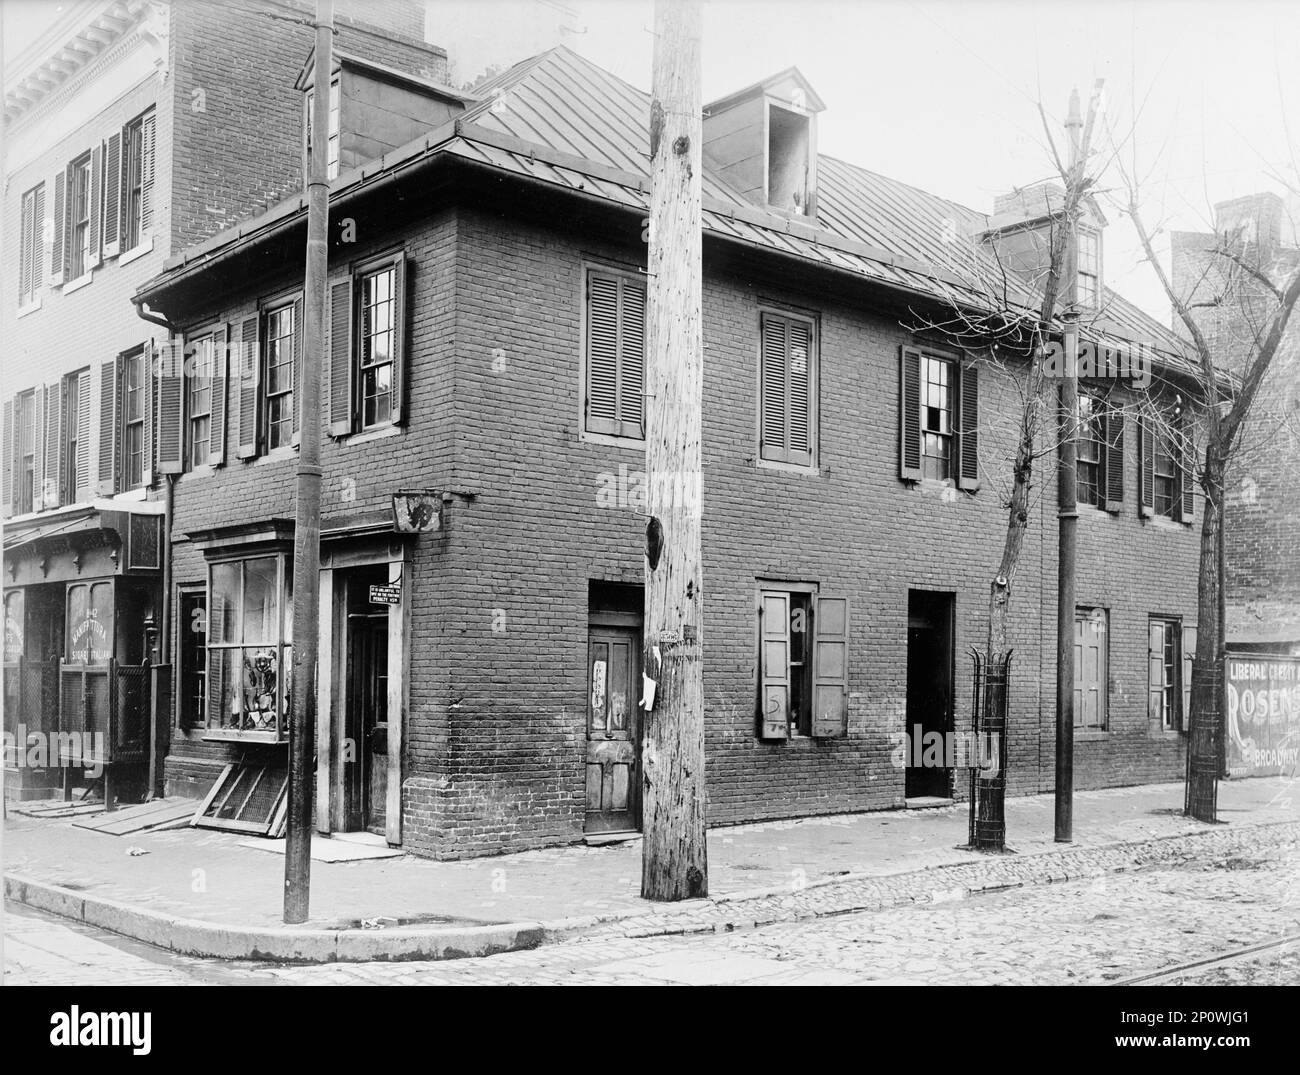 Flags - House Where American Flag Was Made, 1914. Sign: 'It is Unlawful to Spit on the Footway - Penalty $5.00'. The Star-Spangled Banner Flag House in Baltimore, constructed in the late 1700s. Mary Pickersgill, her daughter, and her nieces created a flag sewing business out of their home. Stock Photo